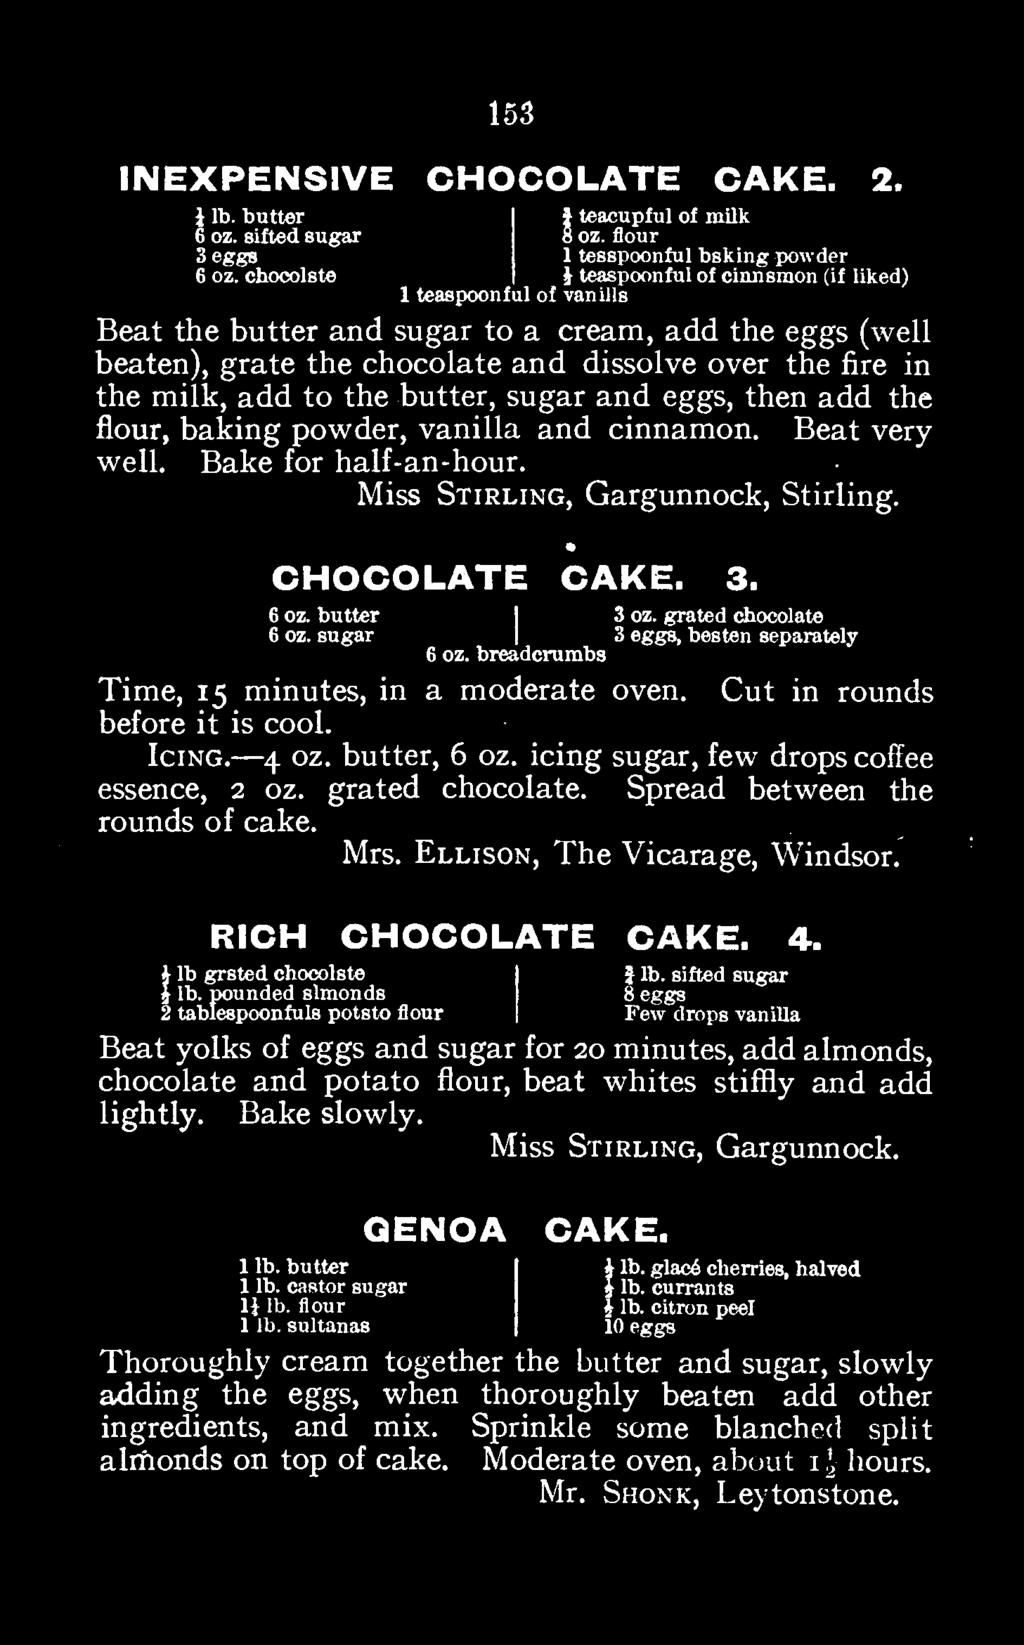 butter, 6 oz. icing sugar, few drops coffee essence, 2 oz. grated chocolate. Spread between the rounds of cake. Mrs. Ellison, The Vicarage, Windsor. RICH CHOCOLATE CAKE. 4. 1 J lb.